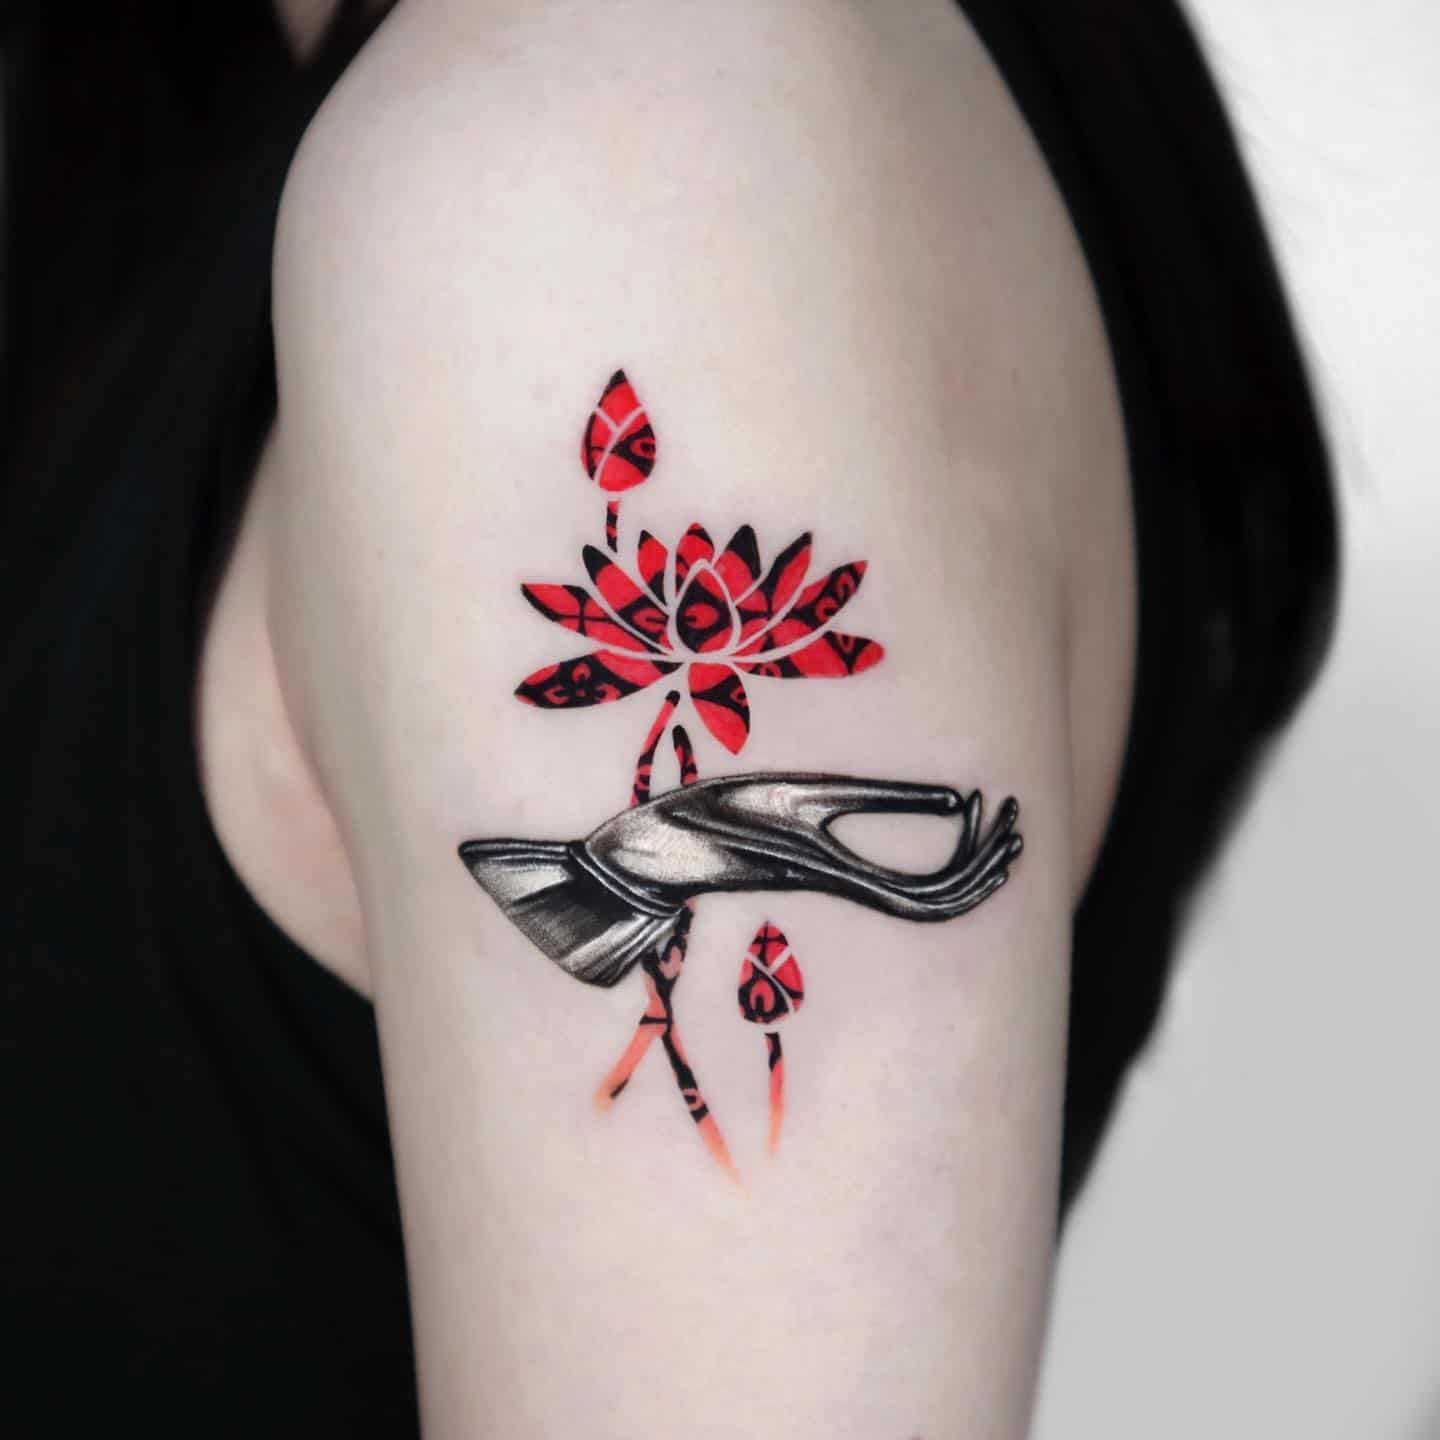 Red lotus tattoo by atelier mimique